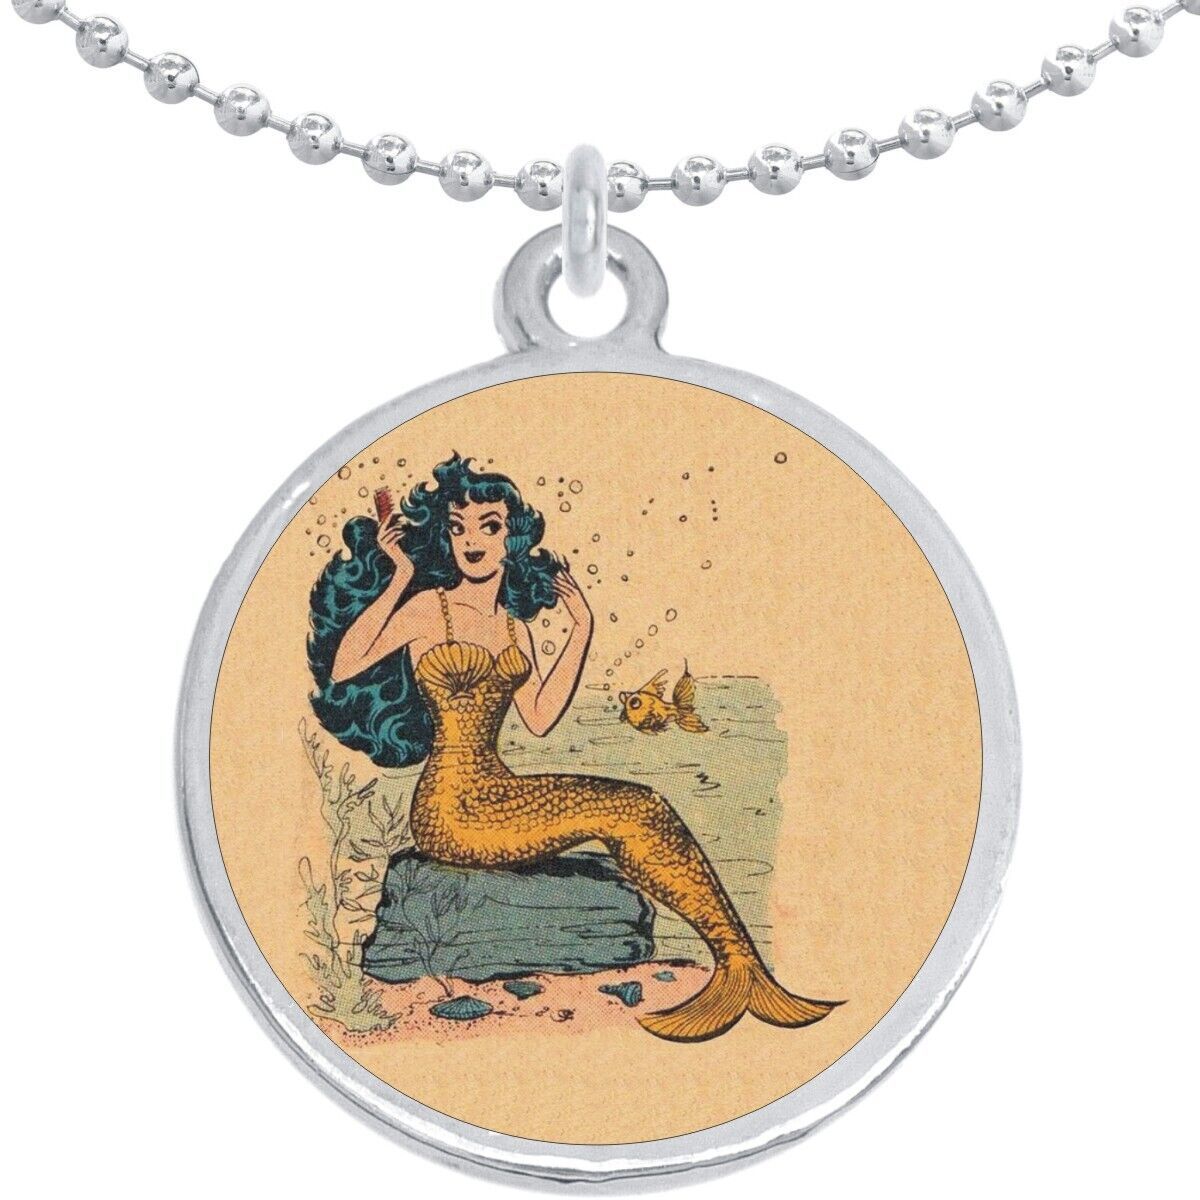 Primary image for Vintage Mermaid Round Pendant Necklace Beautiful Fashion Jewelry